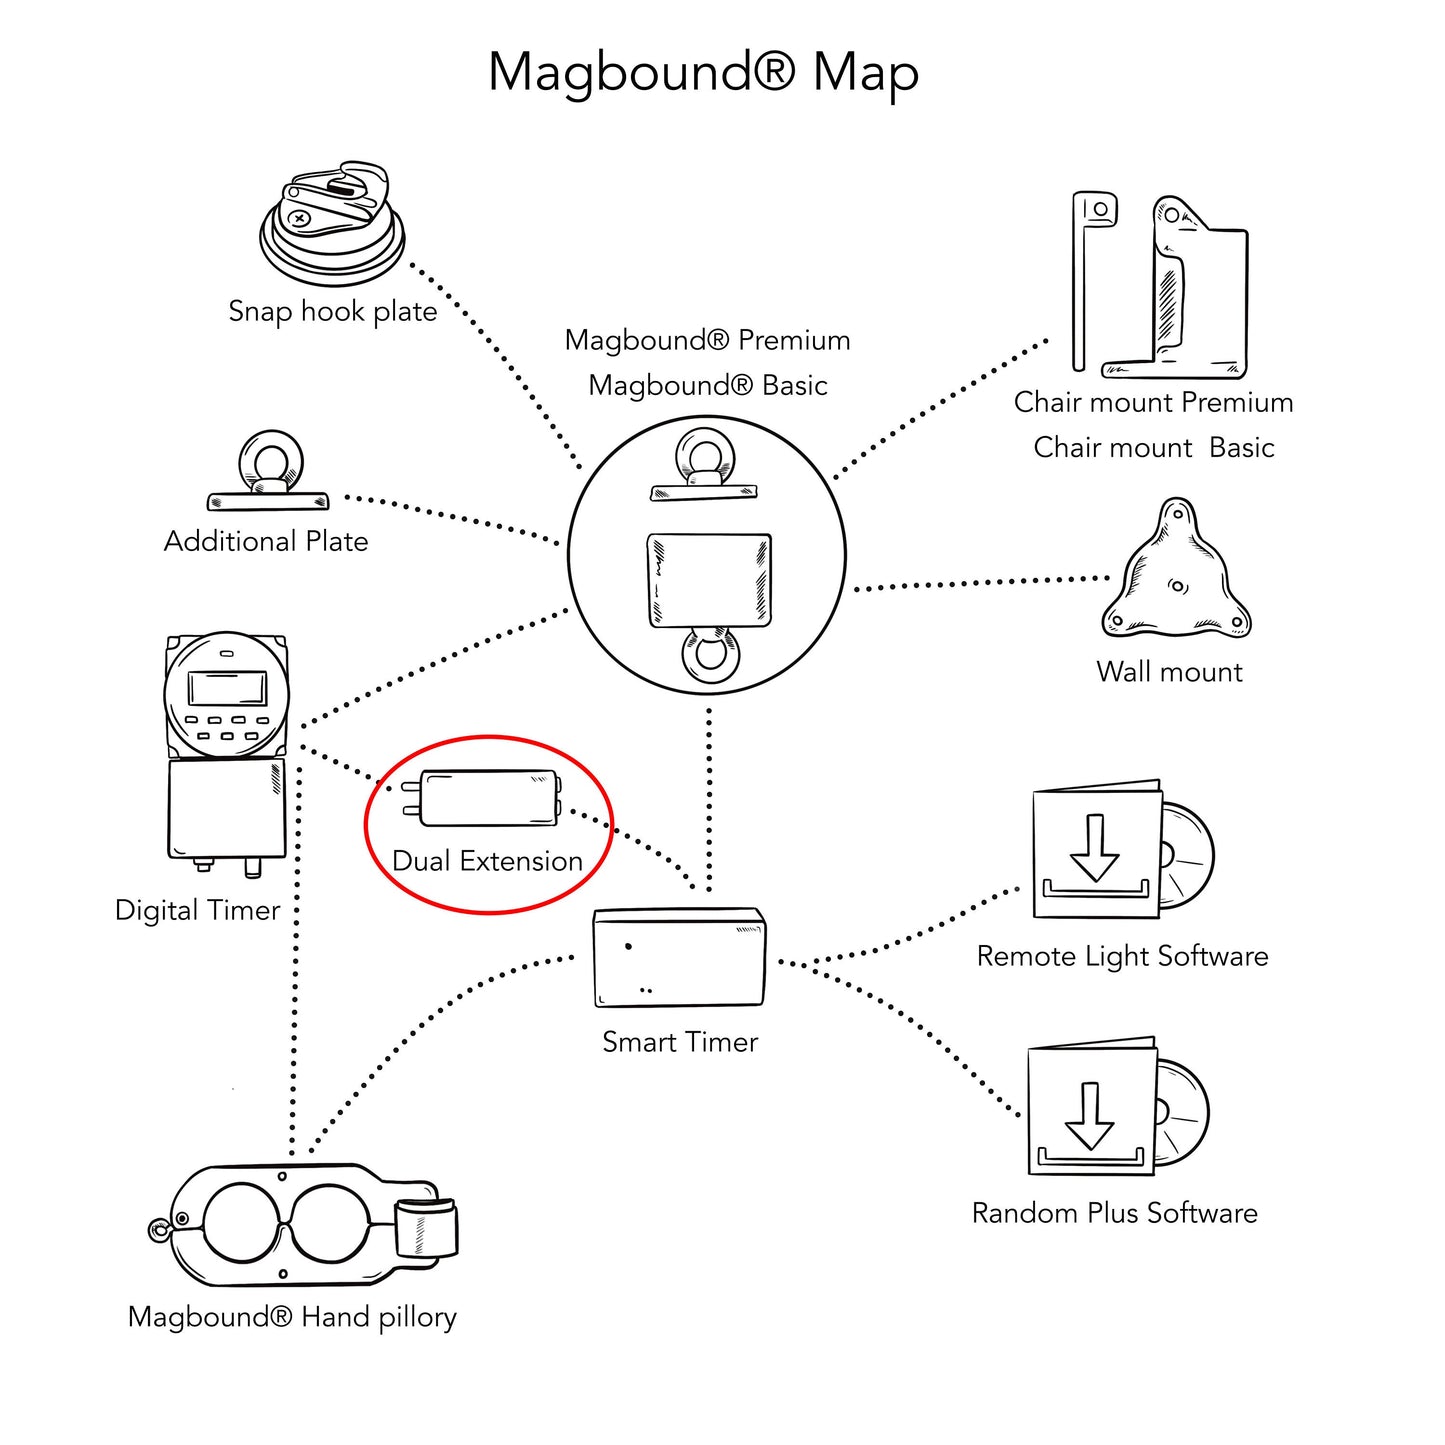 MagBound® Dual Extension for Timer and Smart Timer